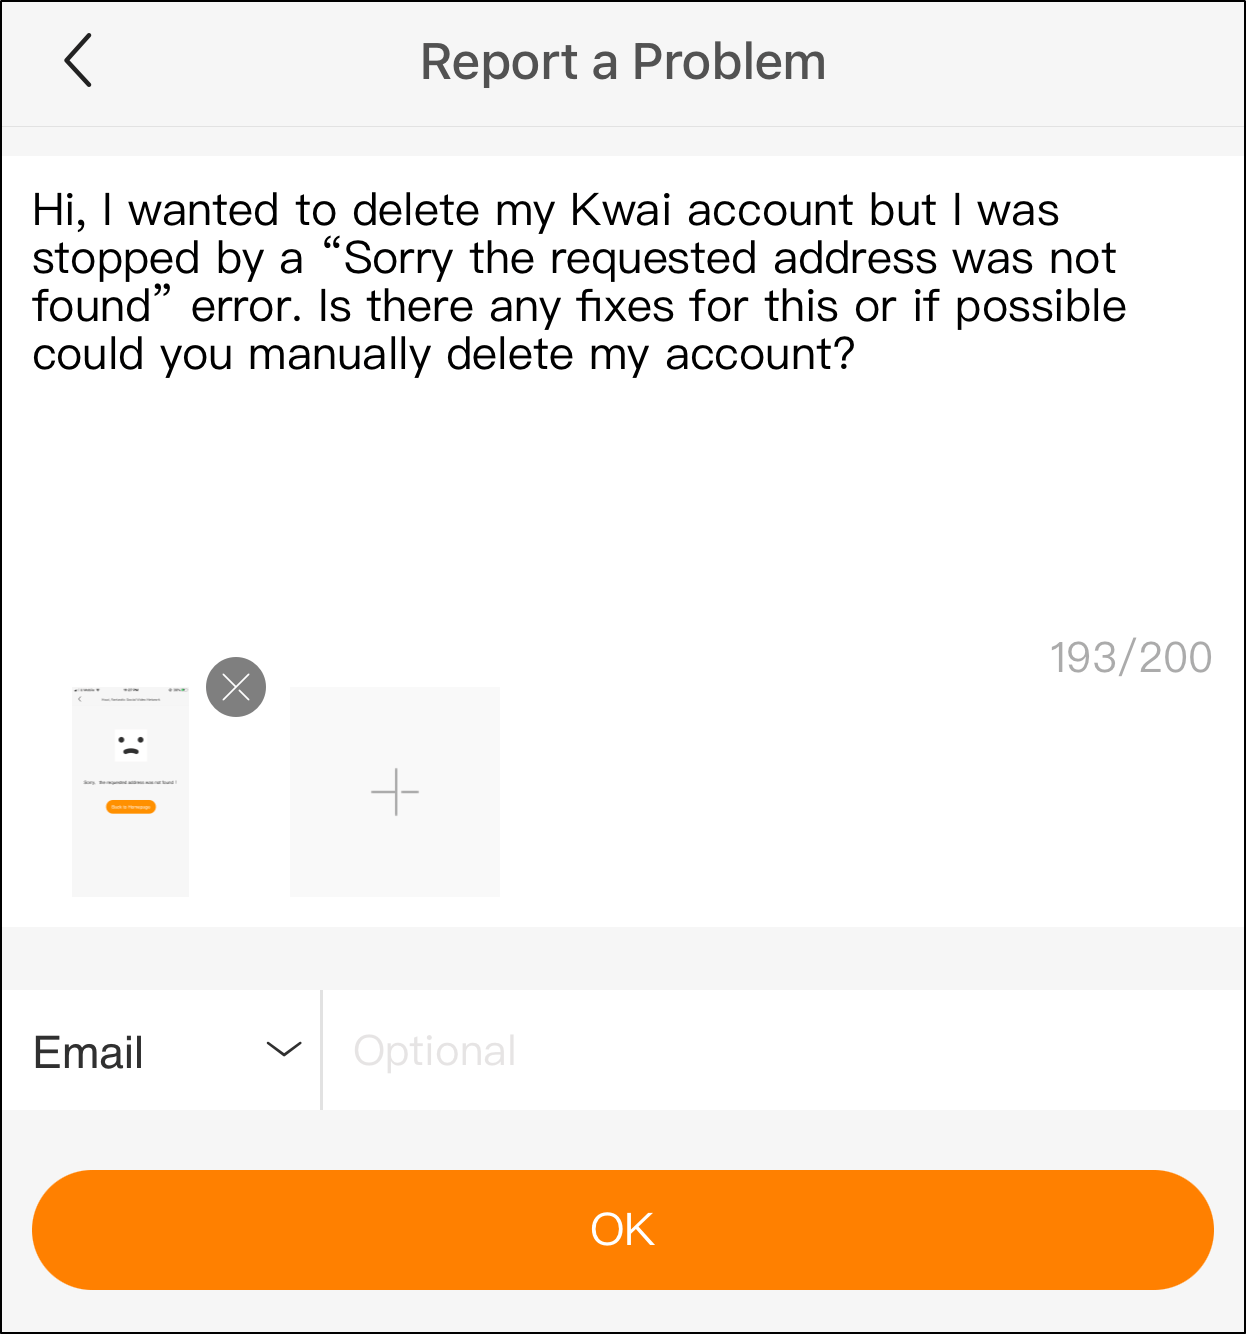 report a problem to kwai support to fix cannot delete kwai account